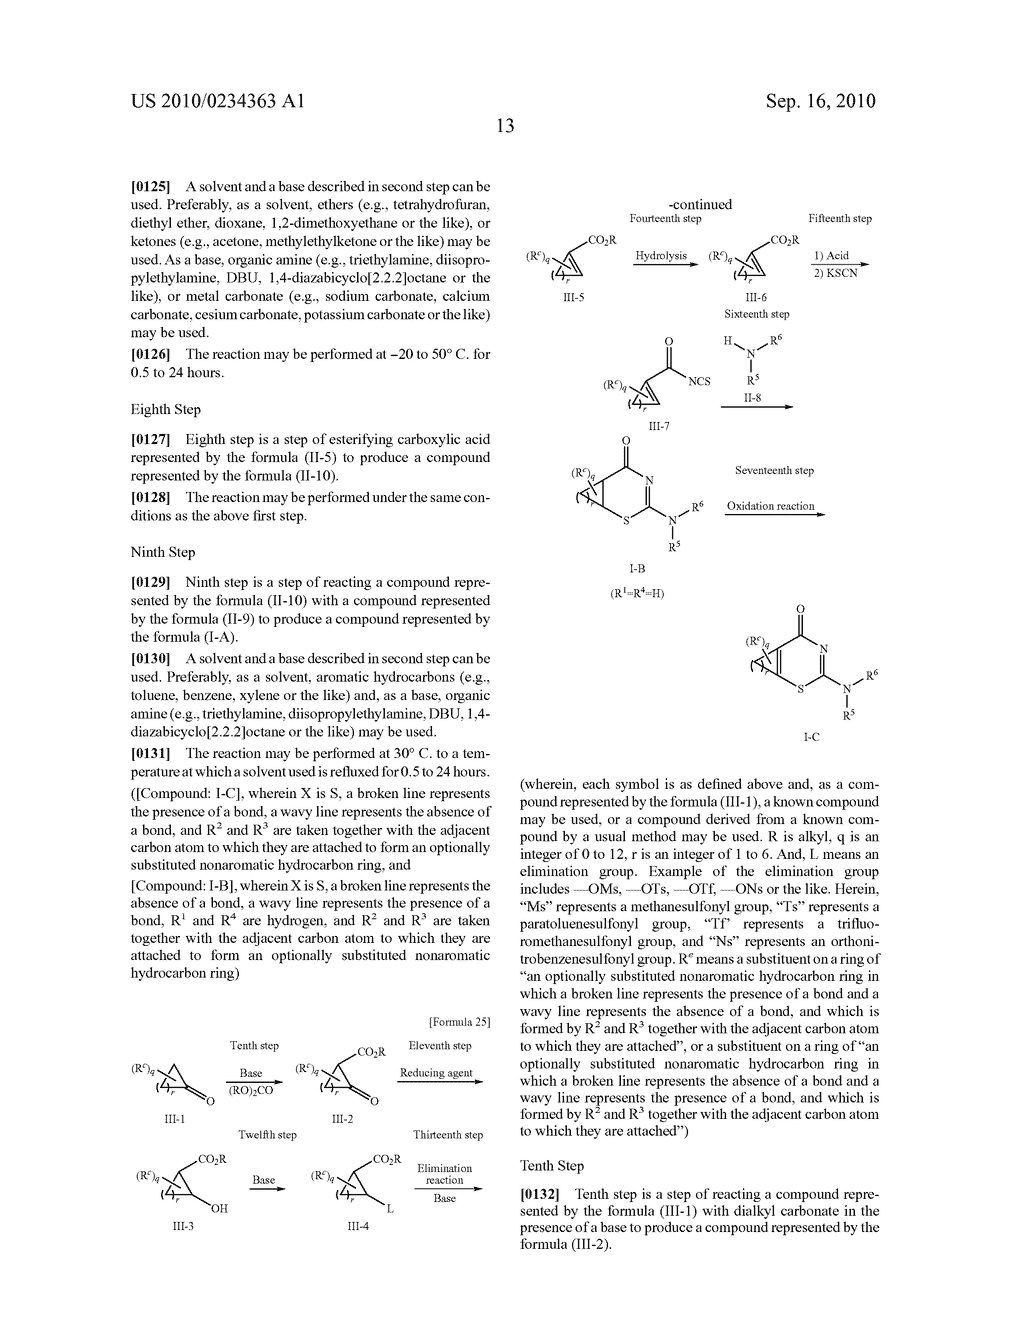 HETEROCYCLIC DERIVATIVE HAVING INHIBITORY ACTIVITY ON TYPE-I 11 DATA-HYDROXYSTEROID DEHYDROGENASE - diagram, schematic, and image 14